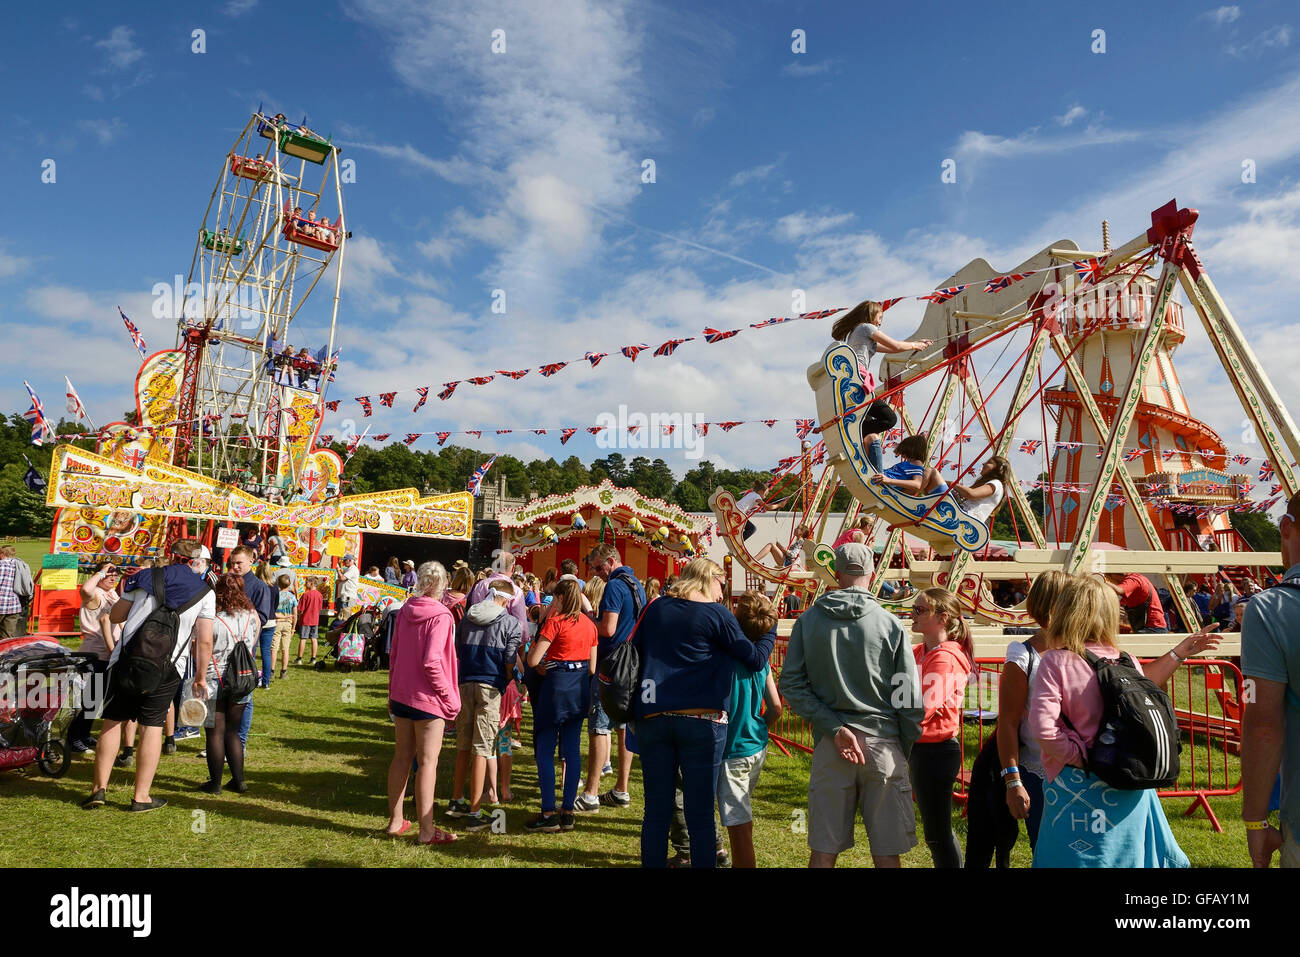 Carfest North, Bolesworth, Cheshire, UK. 30th July 2016. People enjoying the fairground rides. The event is the brainchild of Chris Evans and features 3 days of cars, music and entertainment with profits being donated to the charity Children in Need. Andrew Paterson/Alamy Live News Stock Photo